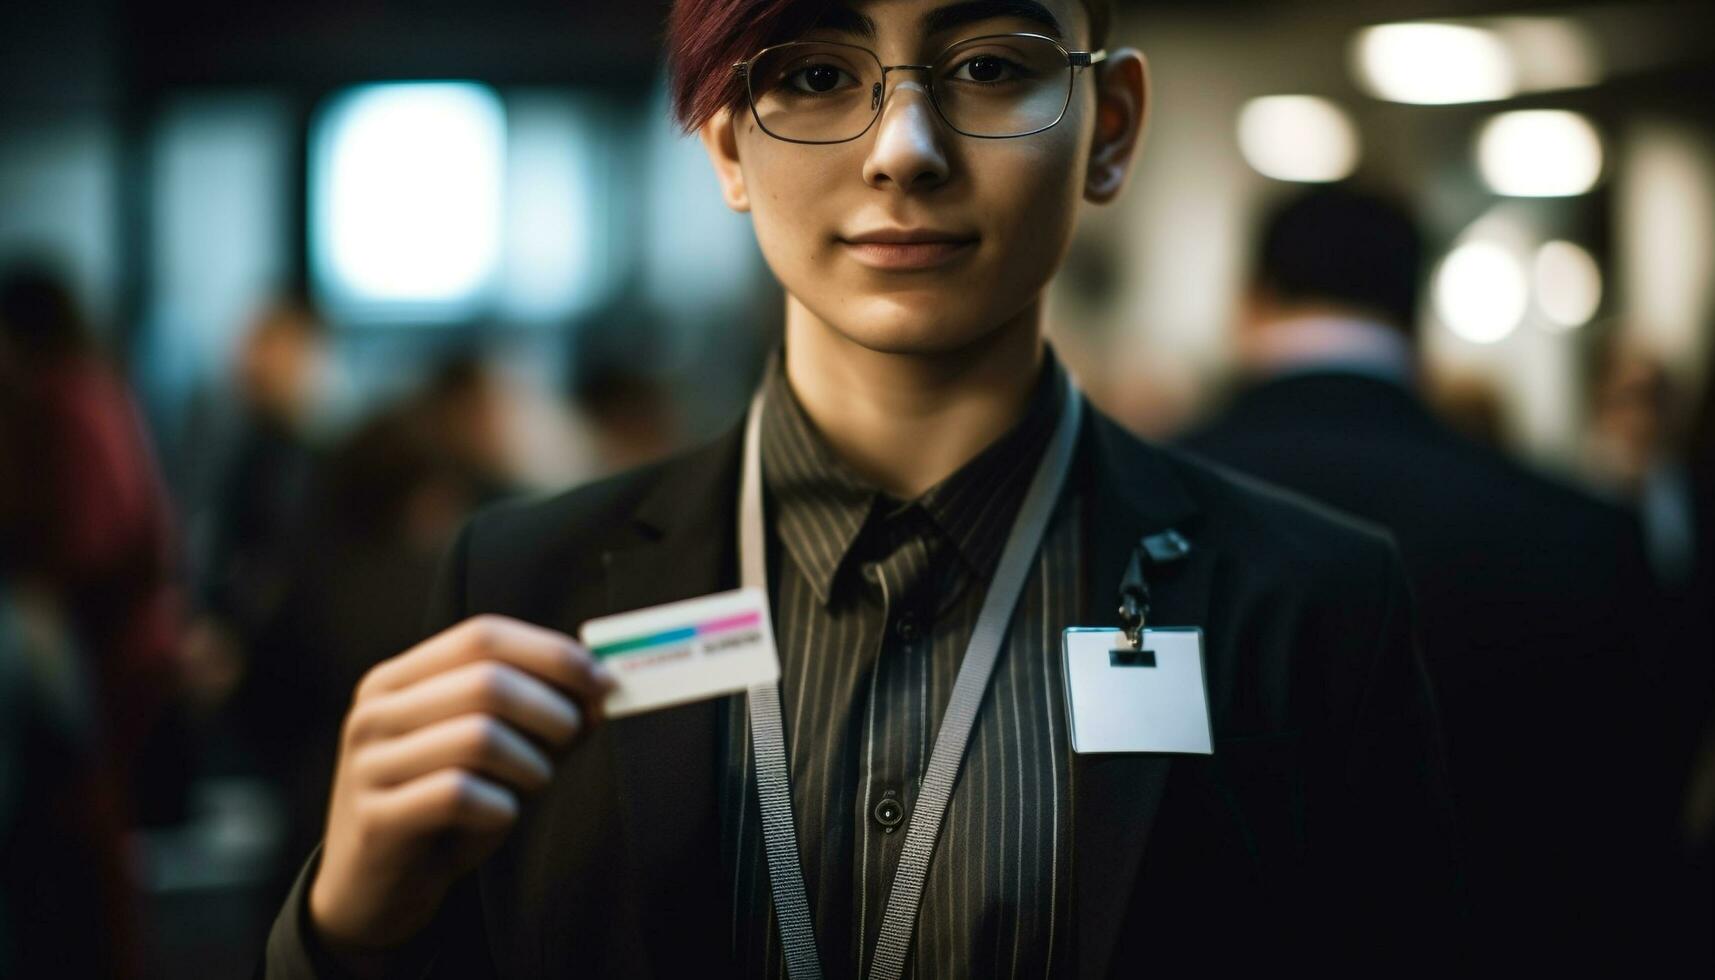 Confident businessman and businesswoman smiling, holding business cards, looking professional generated by AI photo